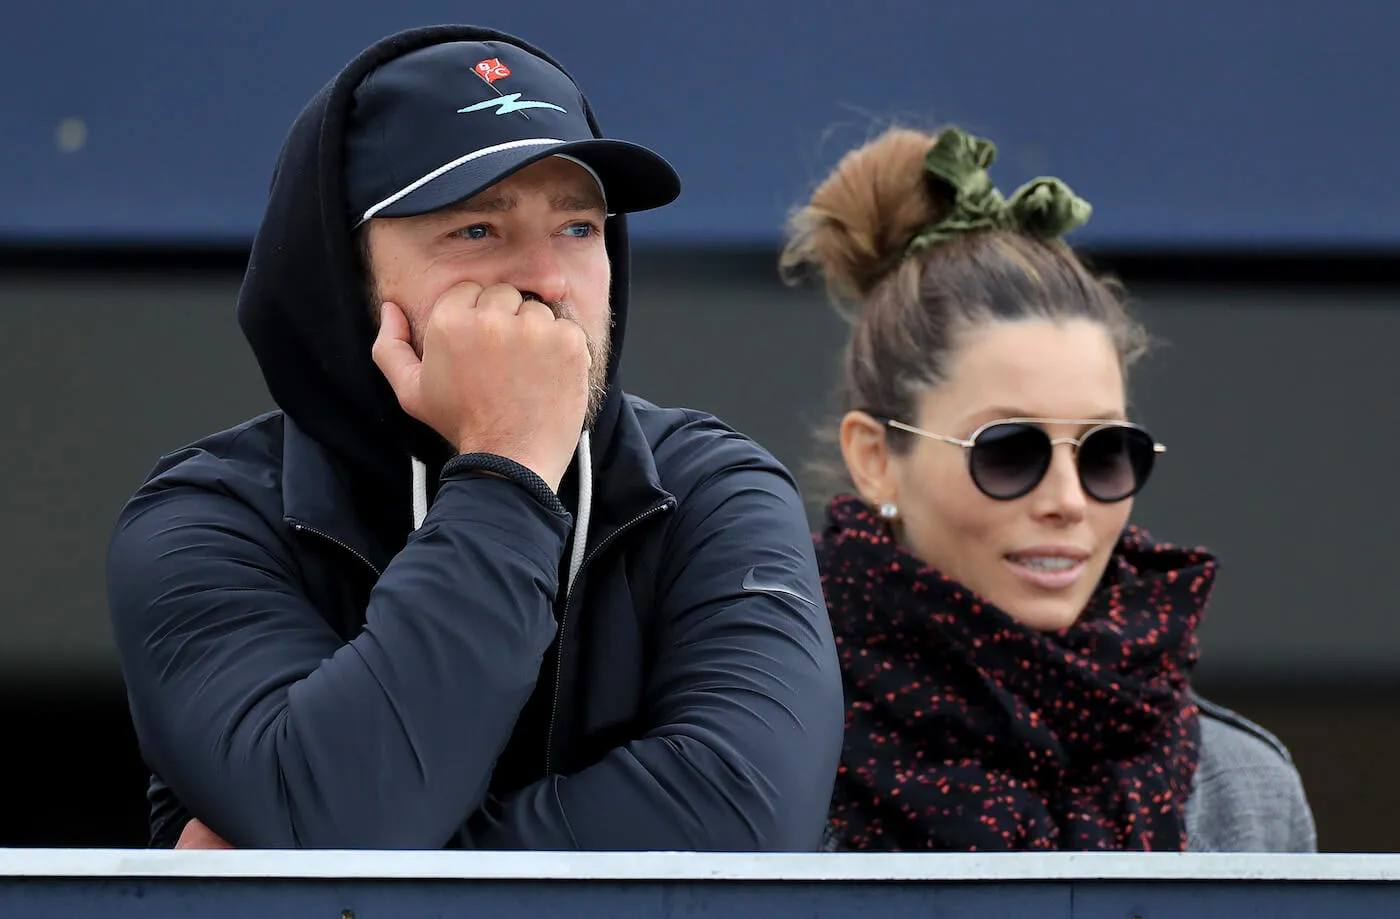 Justin Timberlake resting his head in his hand while wearing a hoodie over his hood. Jessica Biel is next to him in sunglasses and a scarf. The couple is at the Alfred Dunhill Links Championship in 2019.